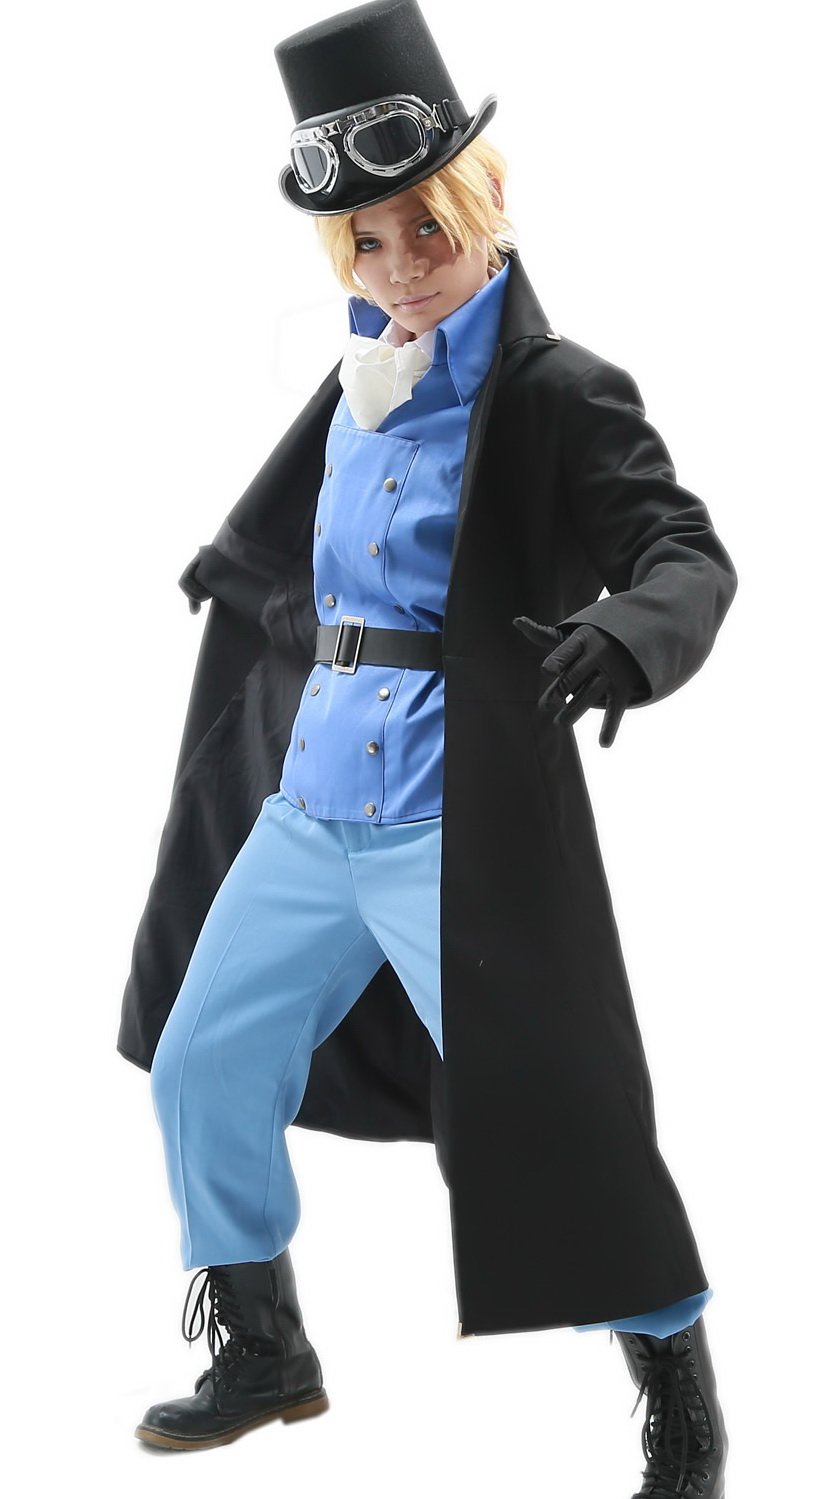 Sabo Cosplay One Piece Sabo Cosplay Costume Xcoser Costumes The Best Cosplay Masks On Xcoser Com X Costume